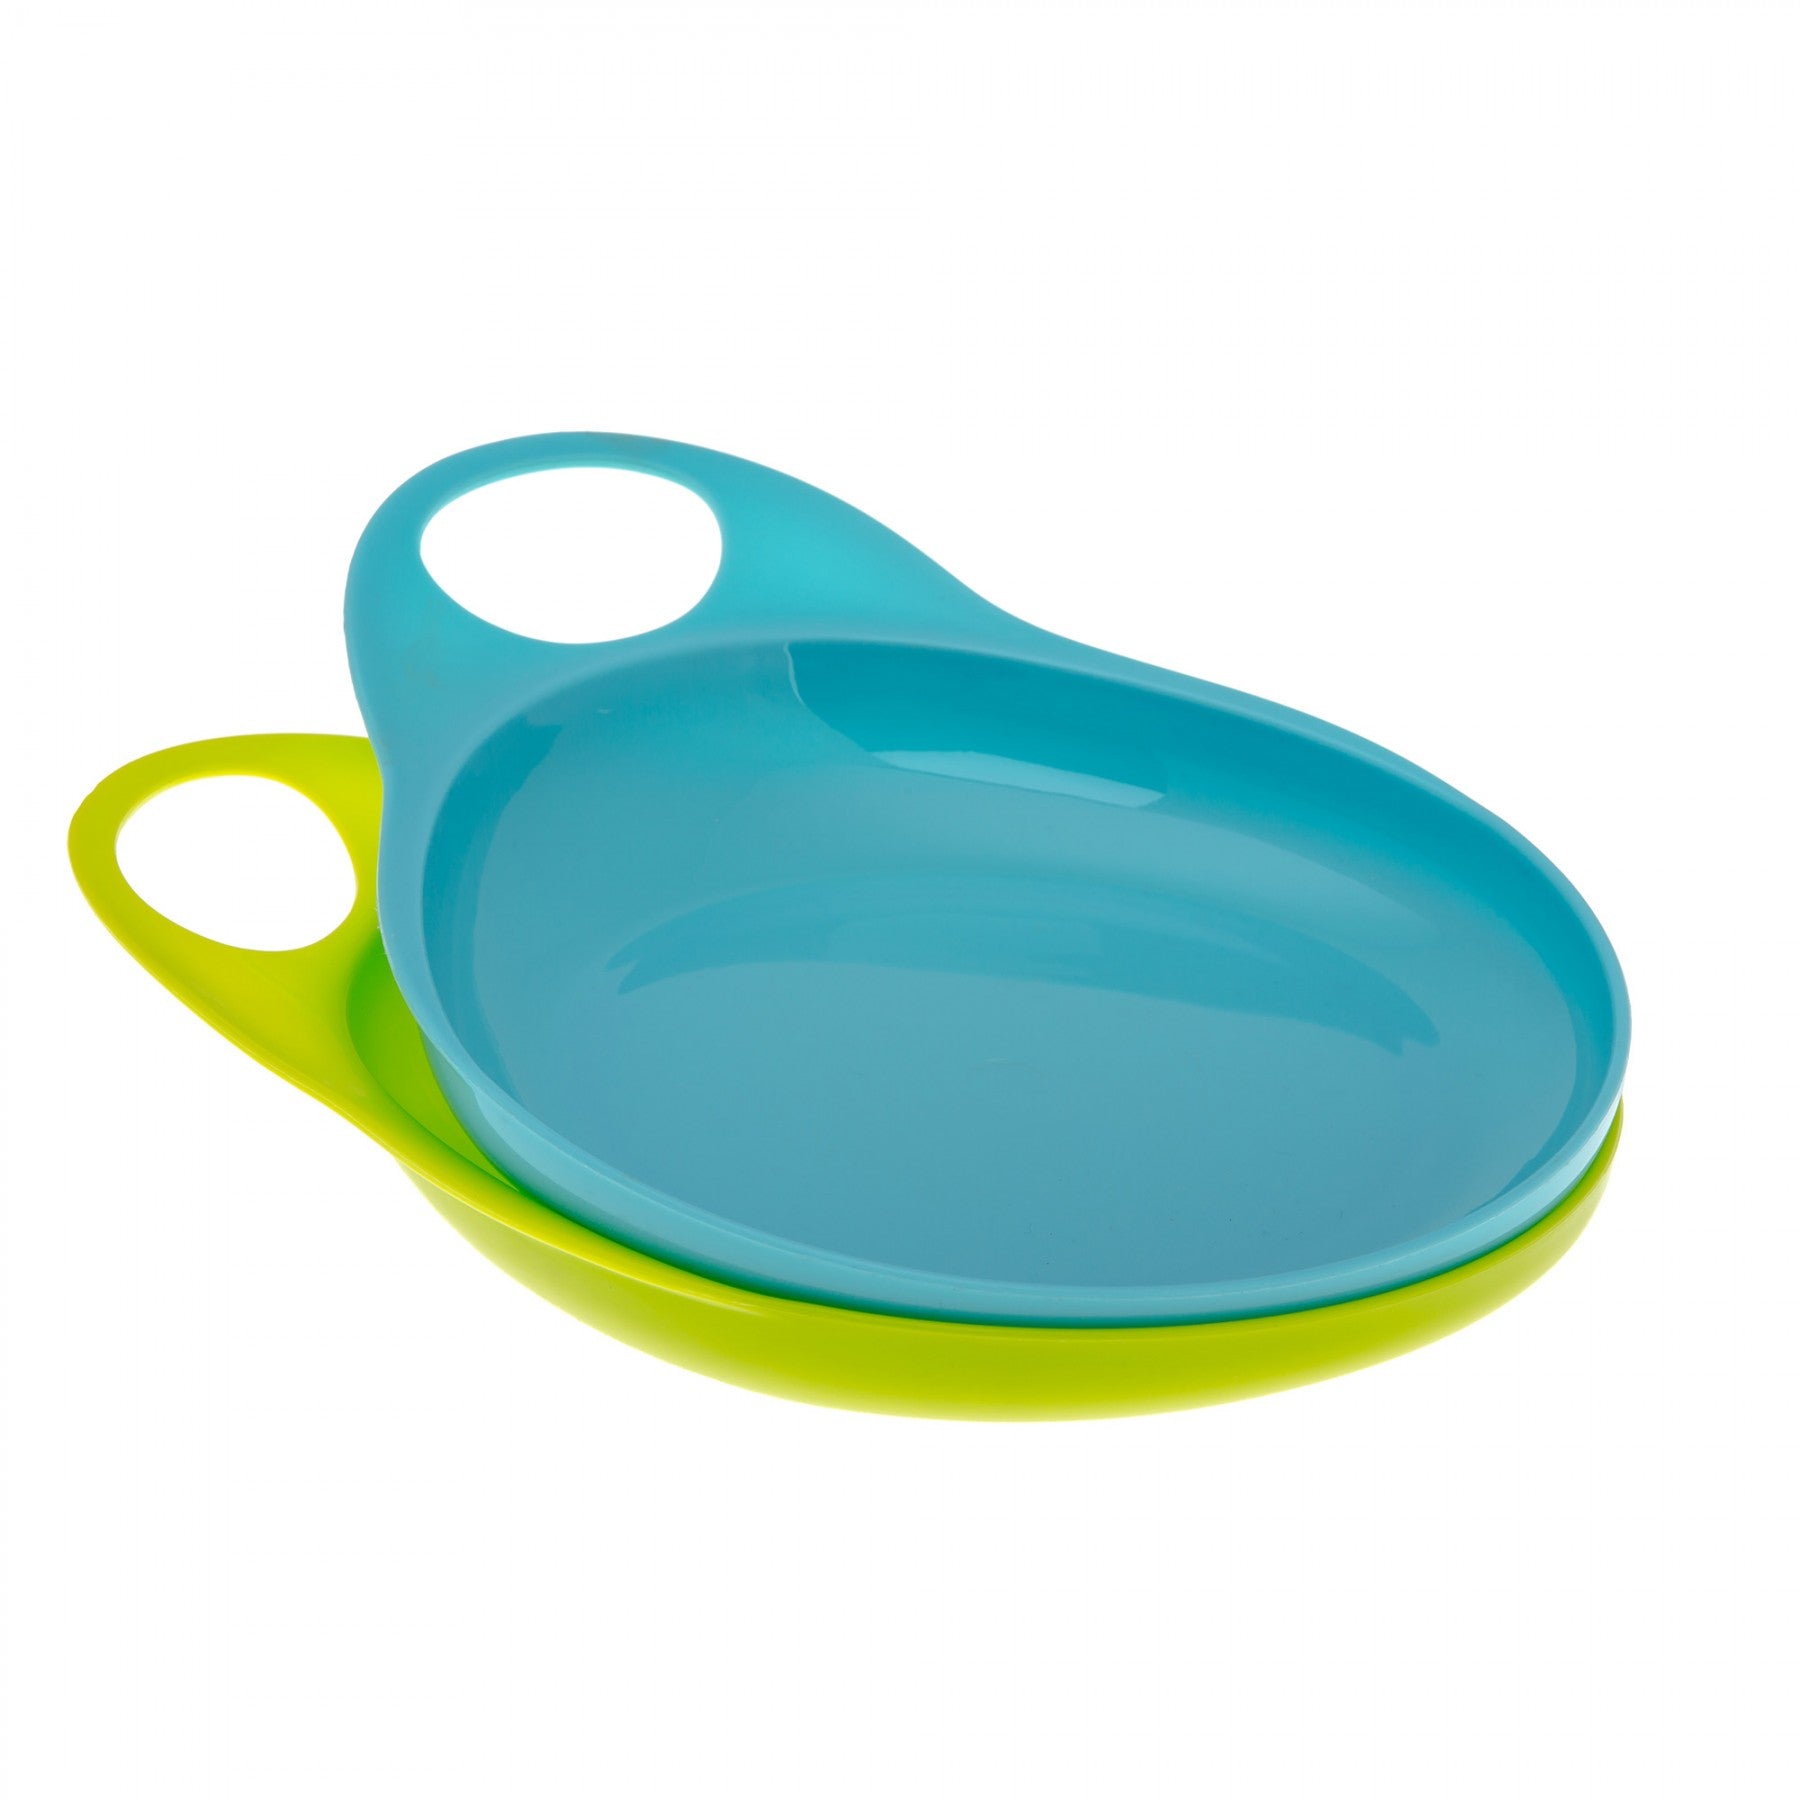 Brother Max - 2 Easy-Hold Plates (Blue/ Green)